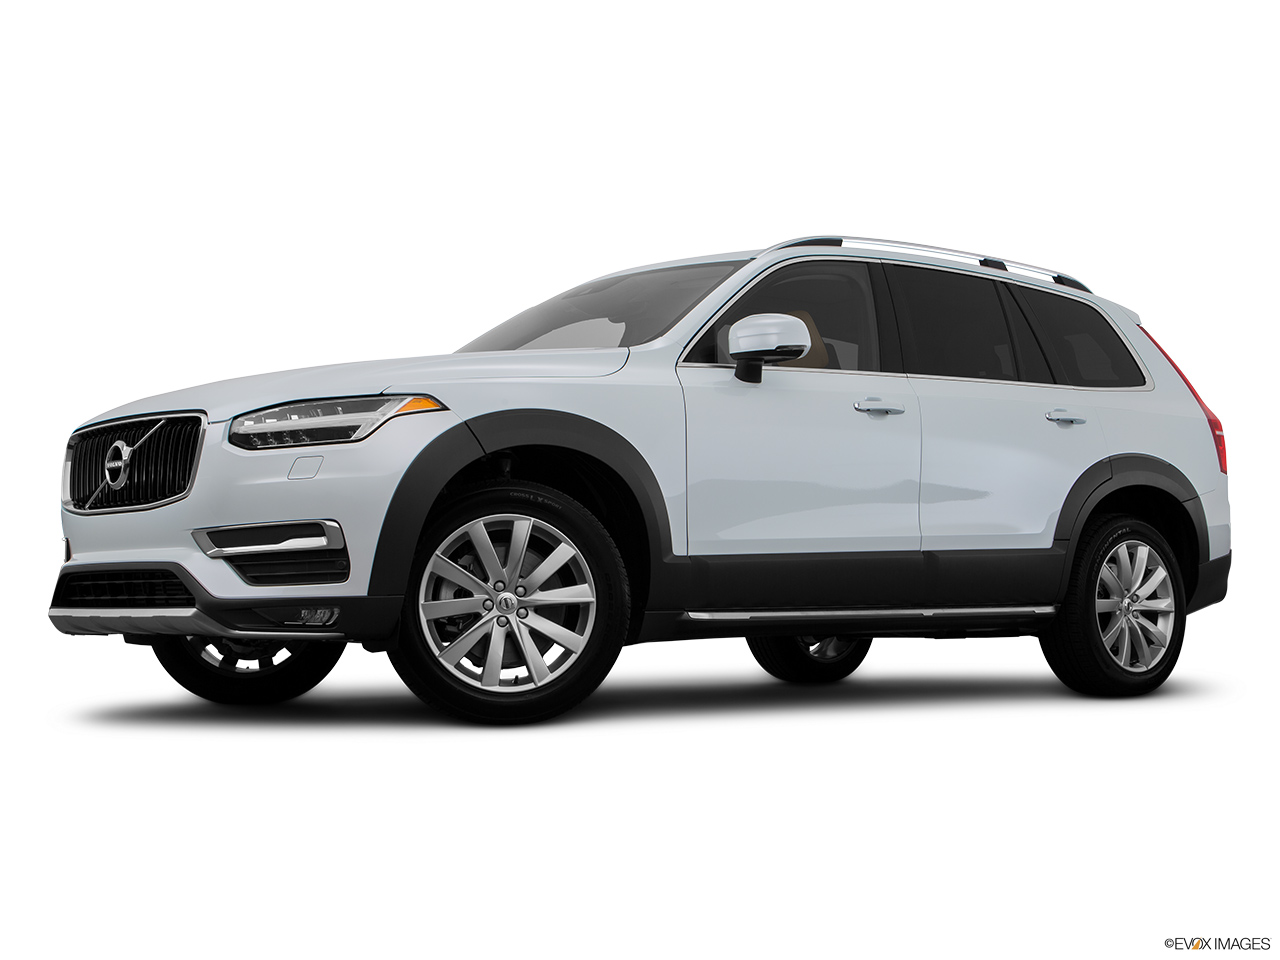 2016 Volvo XC90 T6 AWD Low/wide front 5/8. 